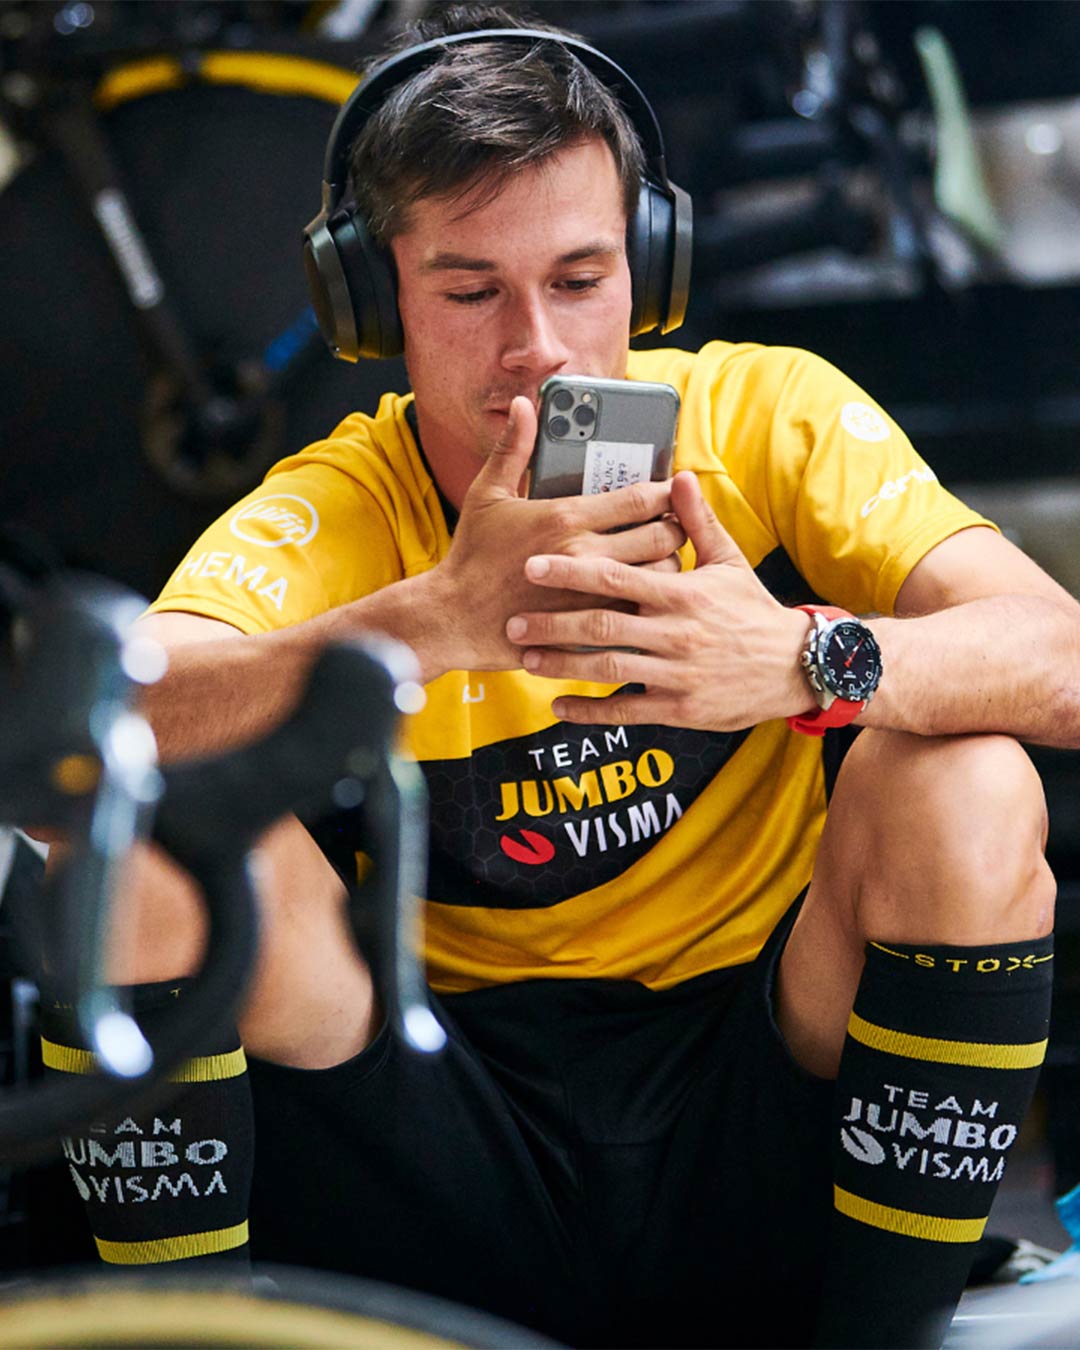 Primoz Roglic wearing headphones and looking at his telephone.